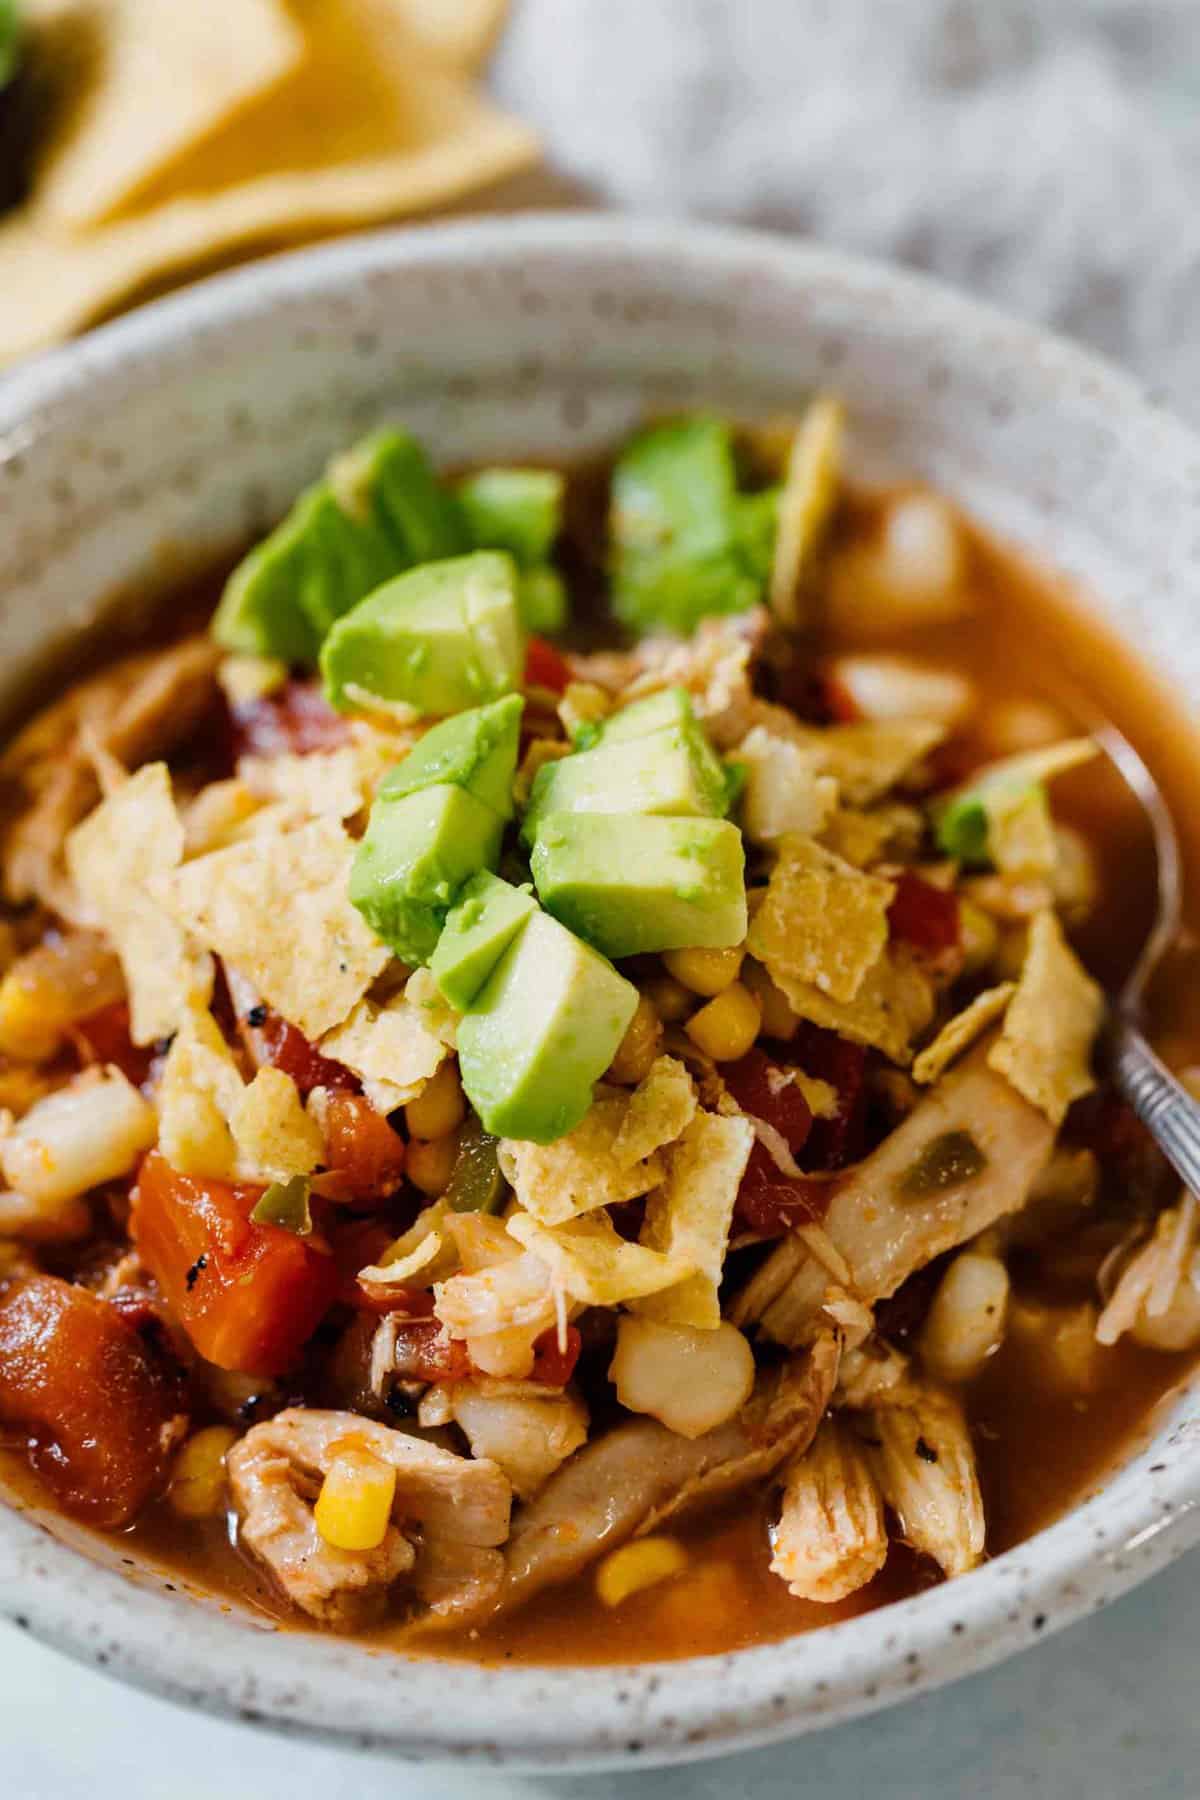 This chicken tortilla soup made on the stovetop is deliciously flavorful and spicy! You'll love how quickly it comes together and all the textures throughout the soup! The broth is SO good you'll be going back for more bowls!